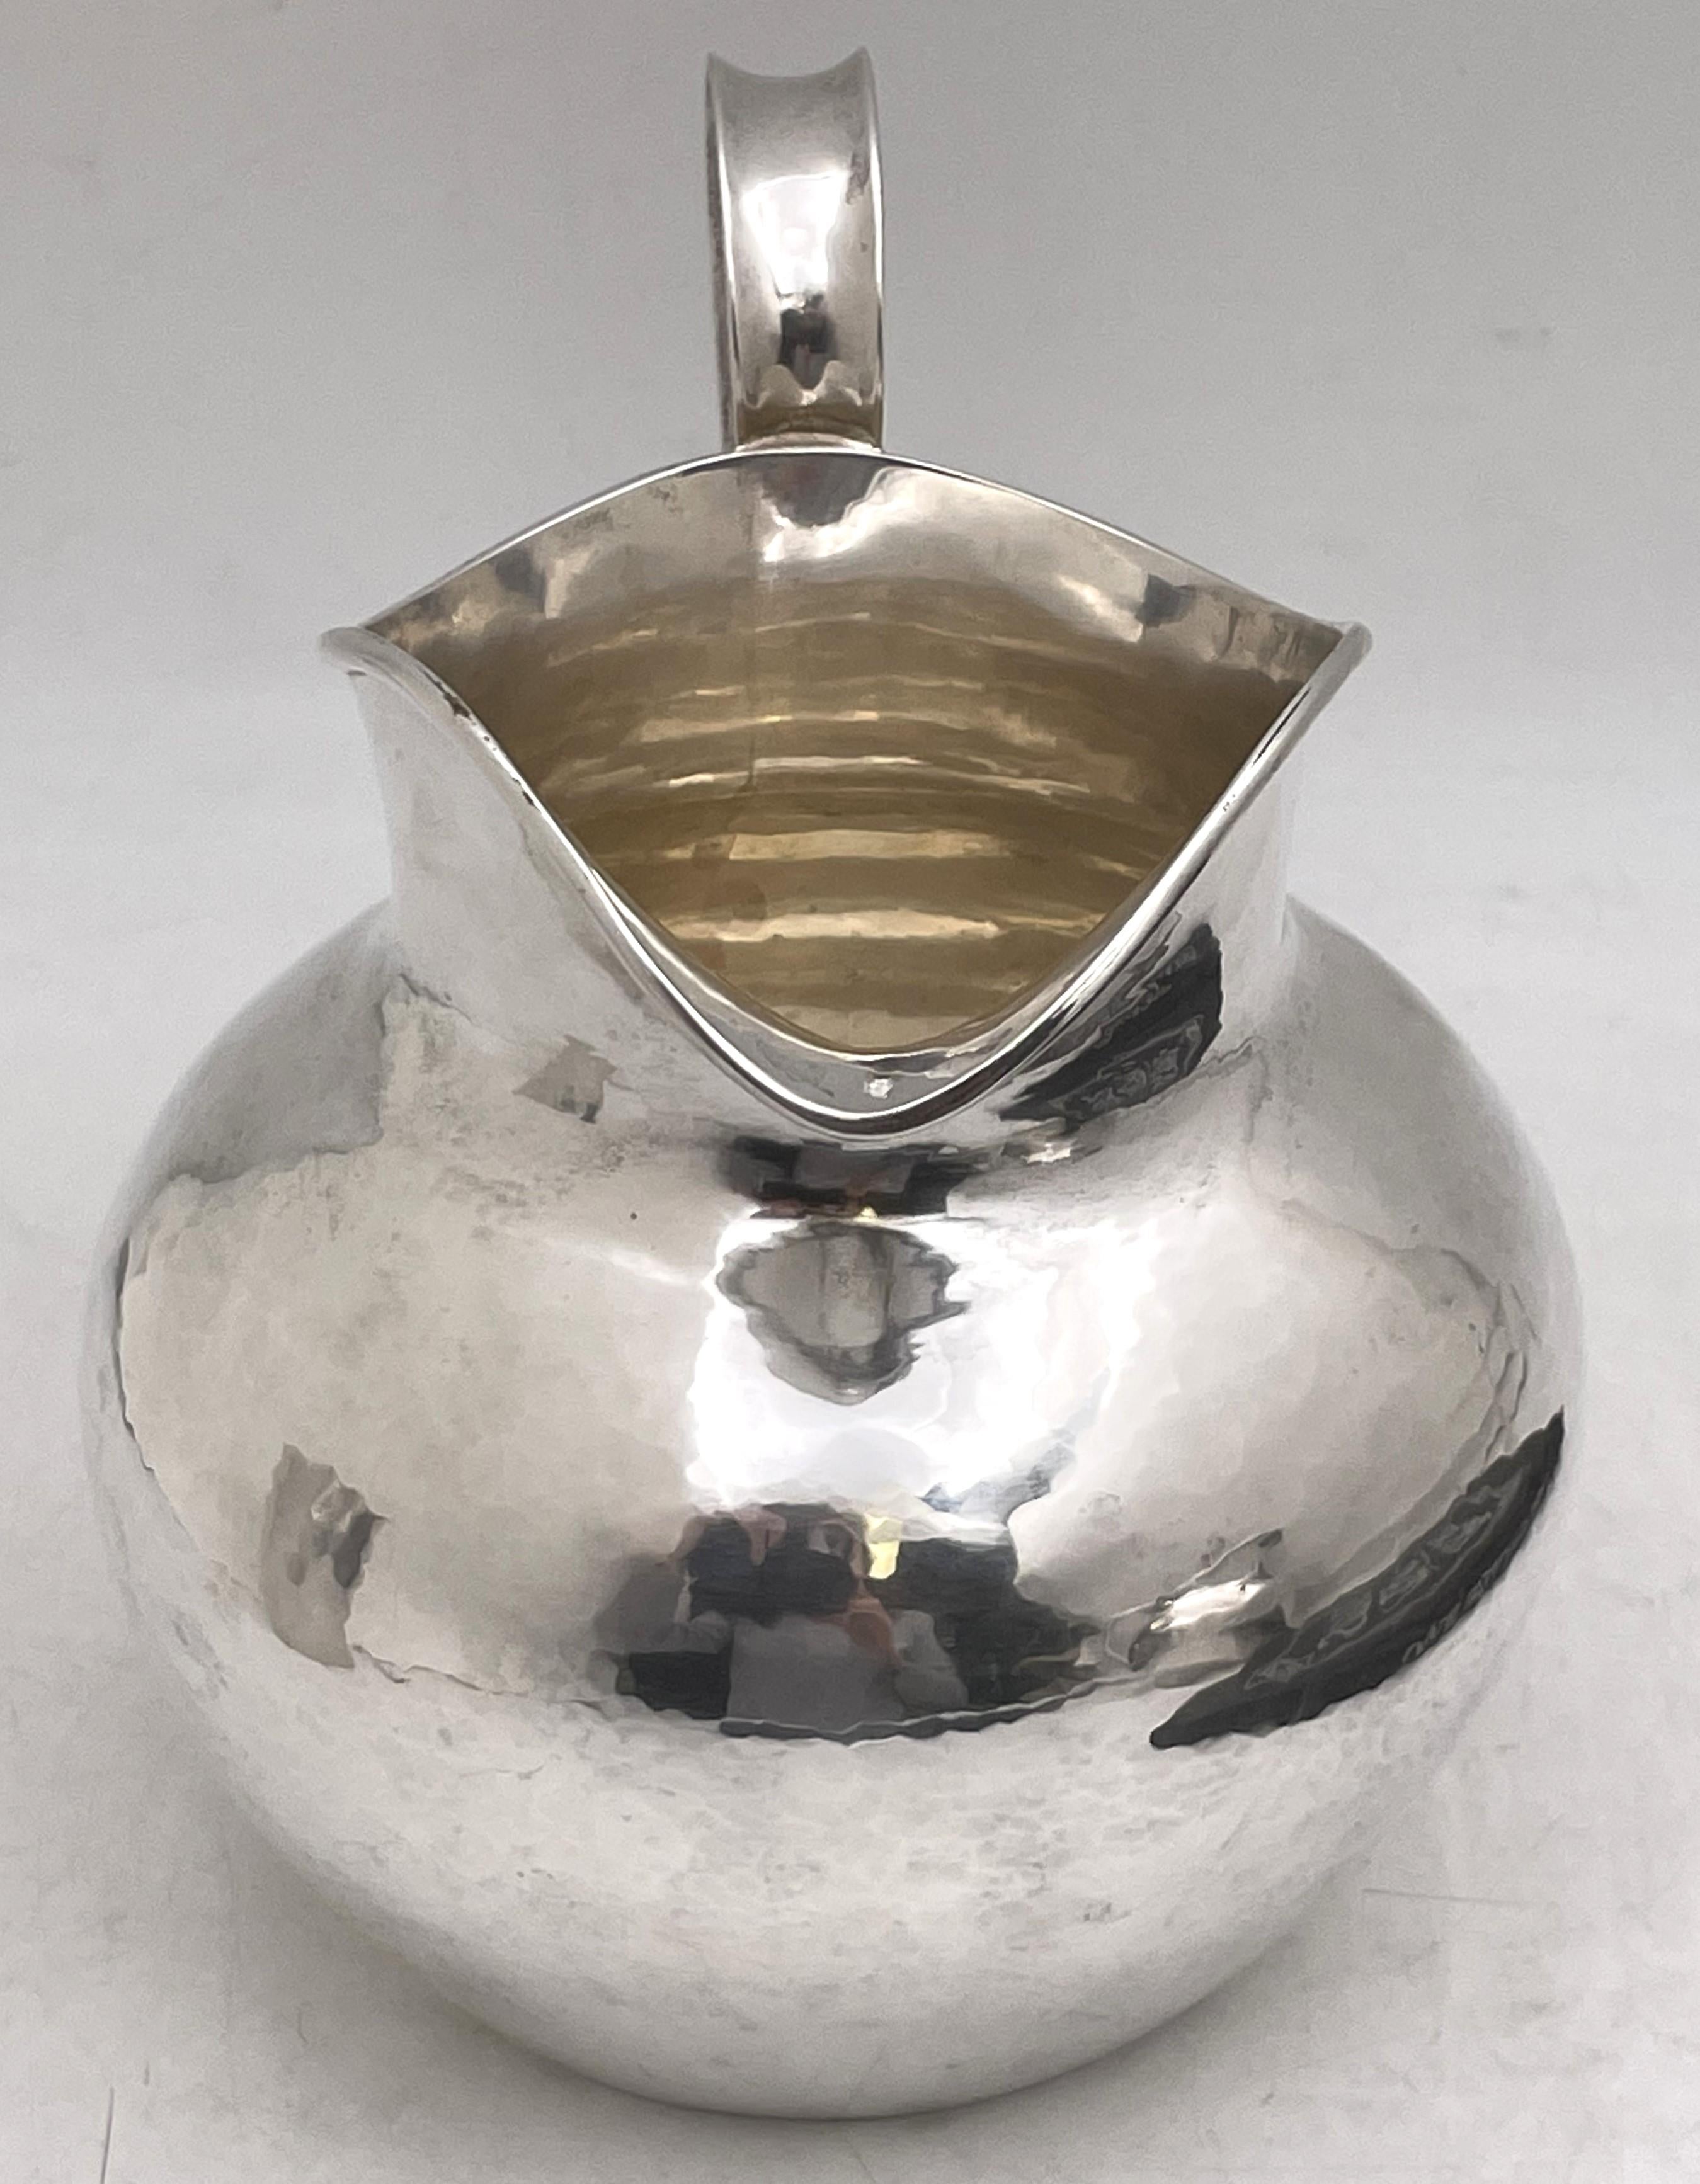 The Kalo Shop, sterling silver beautifully hand wrought pitcher in Arts & Crafts style in an elegant, curvilinear design made in the early 20th century. It measures 7'' in height by 8'' from handle to spout, weighs 18.9 troy ounces, contains 3 1/2